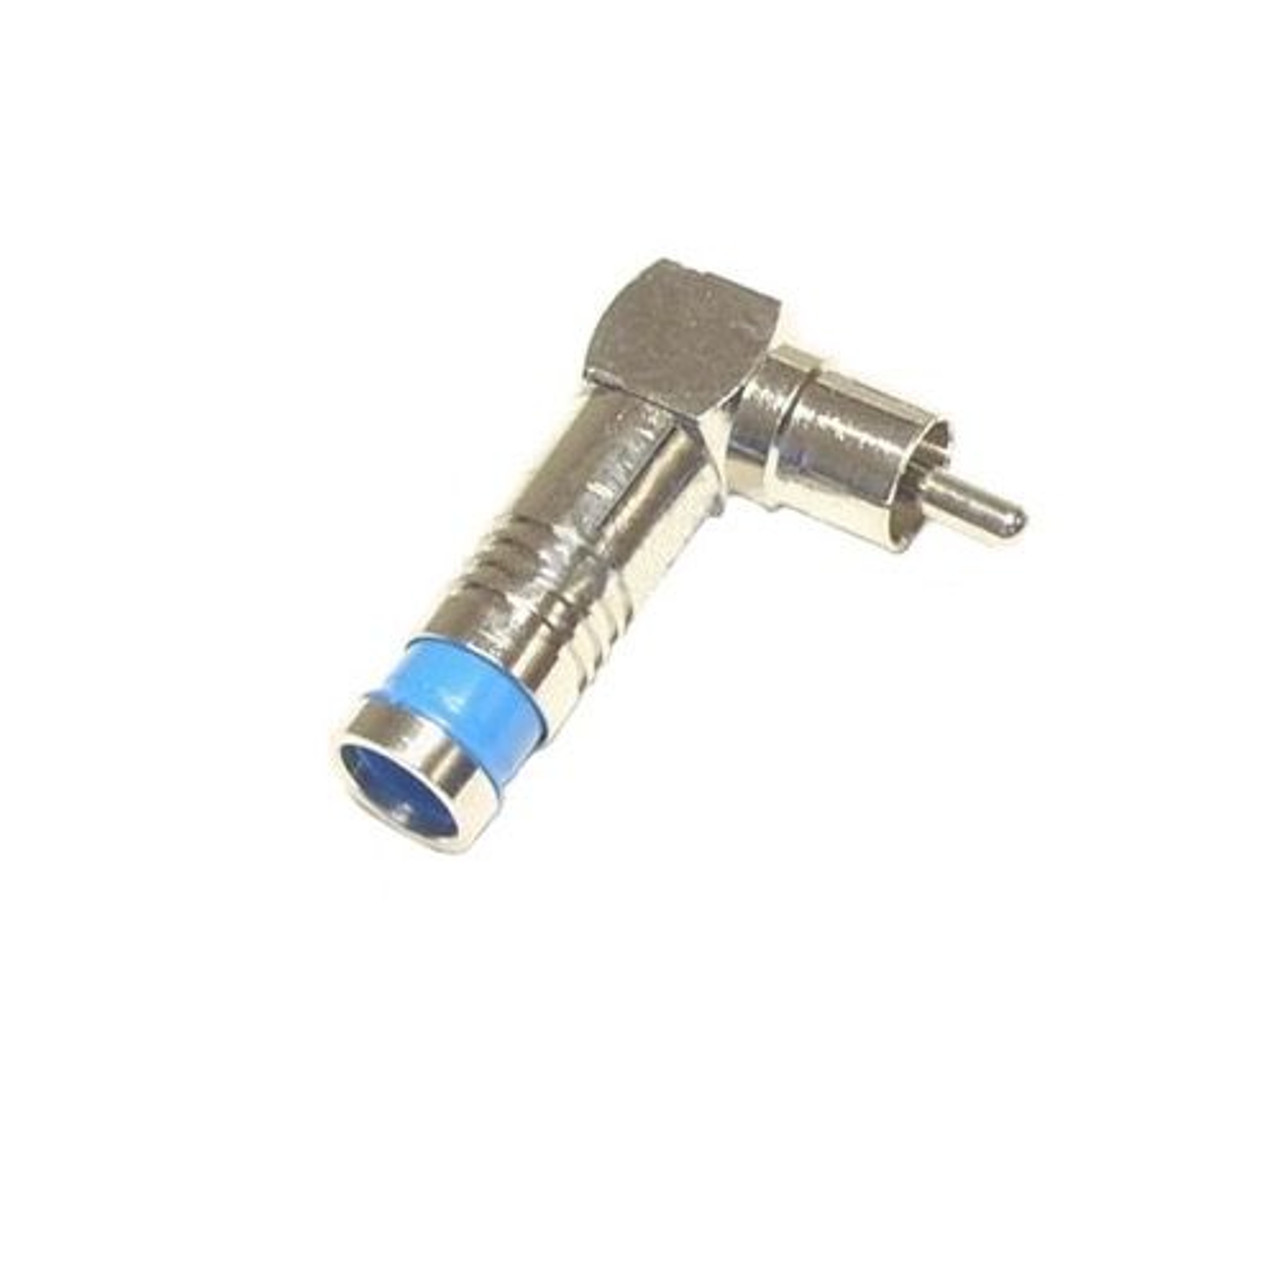 Vanco RCA RG6 Quad Shield Compression Connector Right Angle 90 Degree Permaseal Coaxial Cable Male Adapter F to RCA 1 Pack Stereo Cable Connector Audio Video Hook-Up